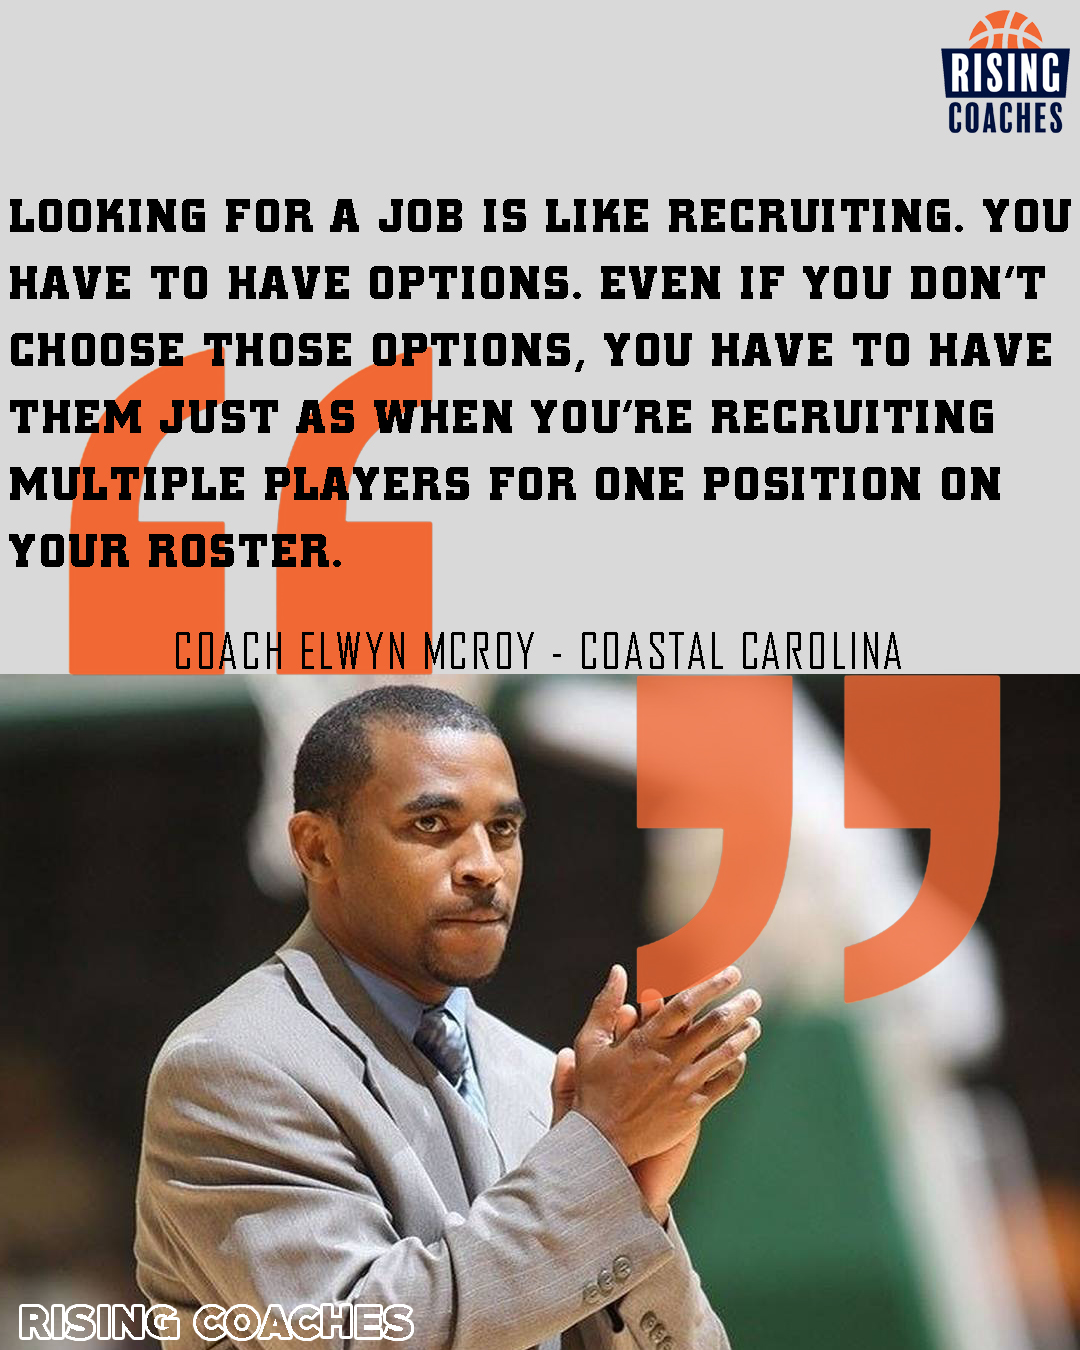 Quotes: Elwyn McRoy - Looking for a Job is Like Recruiting